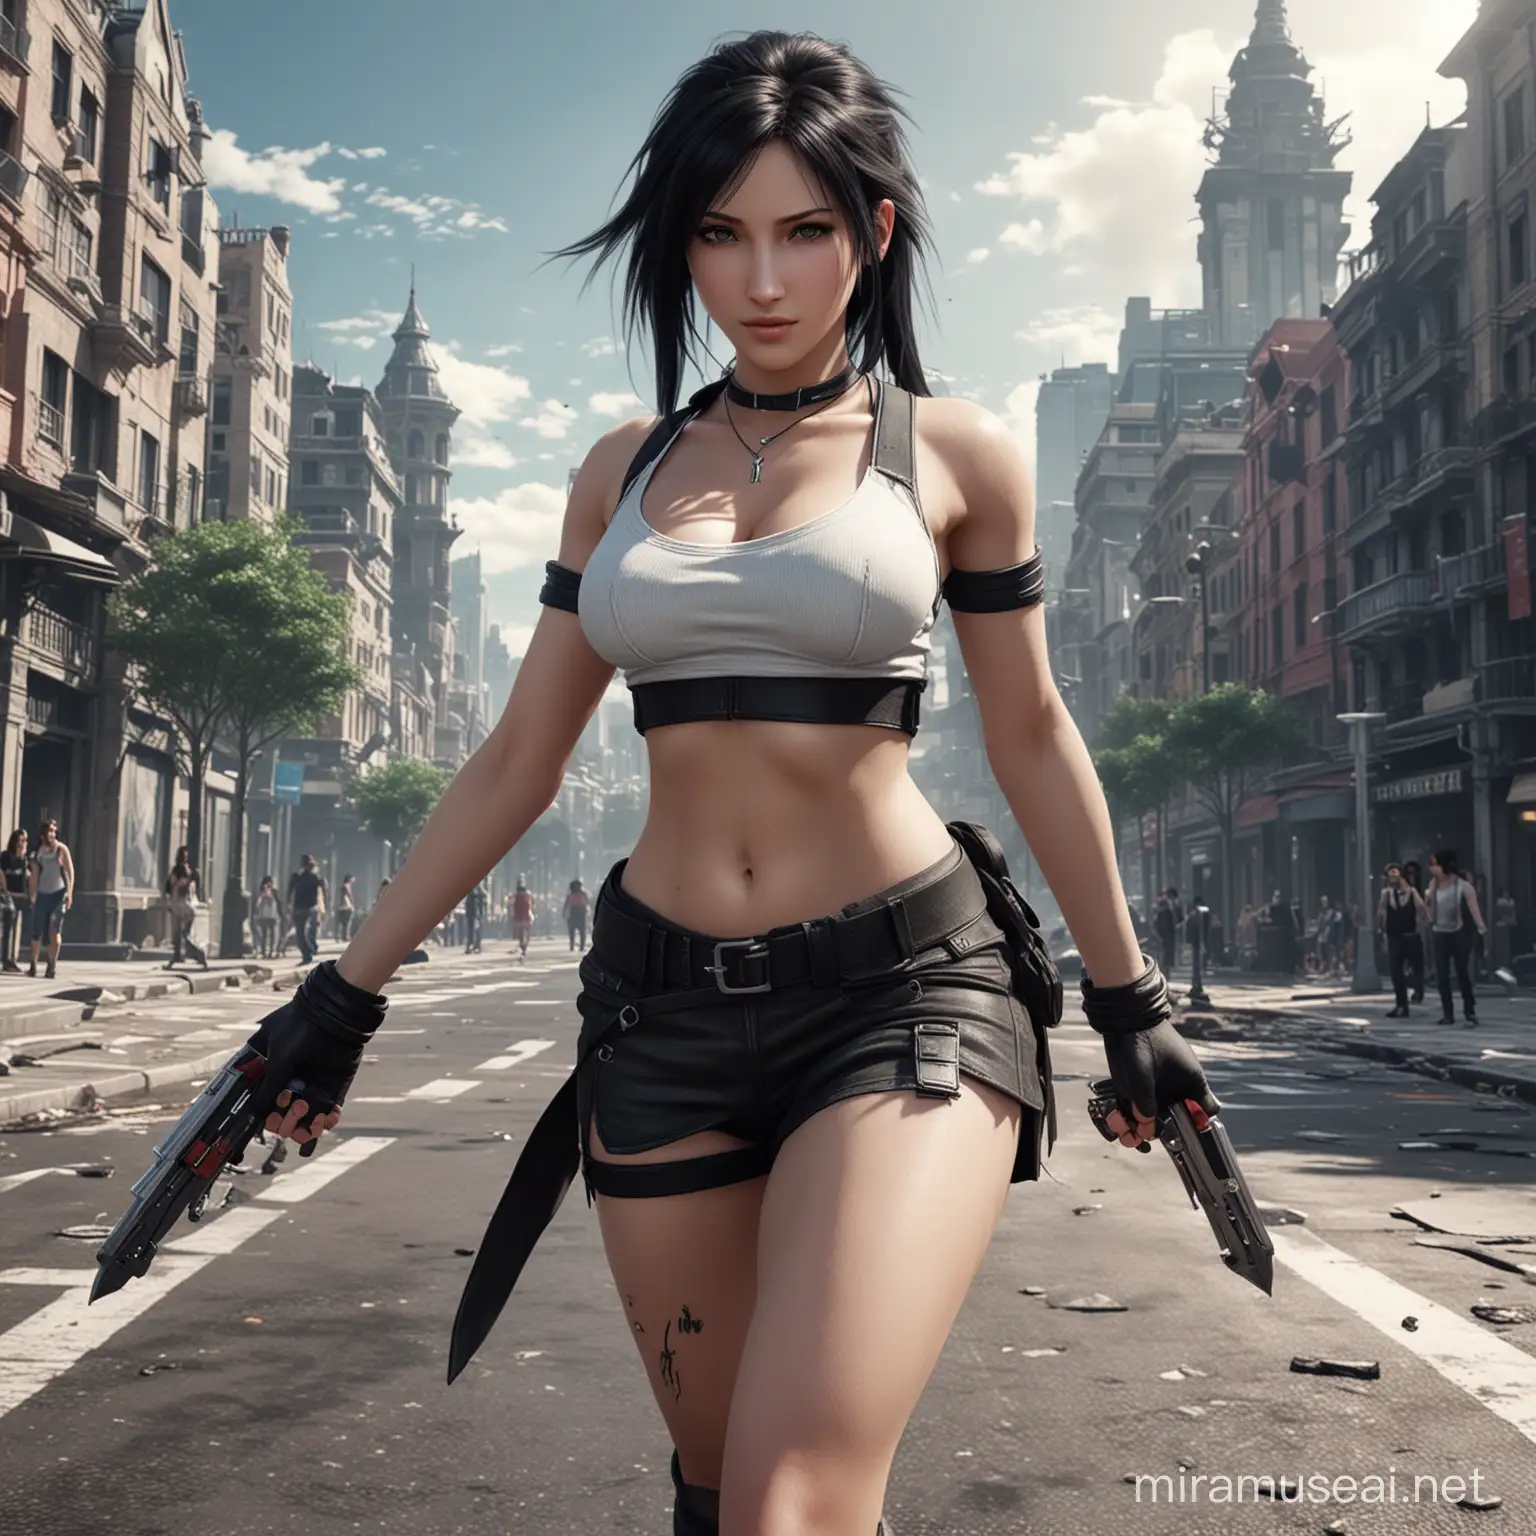 Tifa Final Fantasy Character in Action with UltraRealistic Sketch Style in a Modern City Background